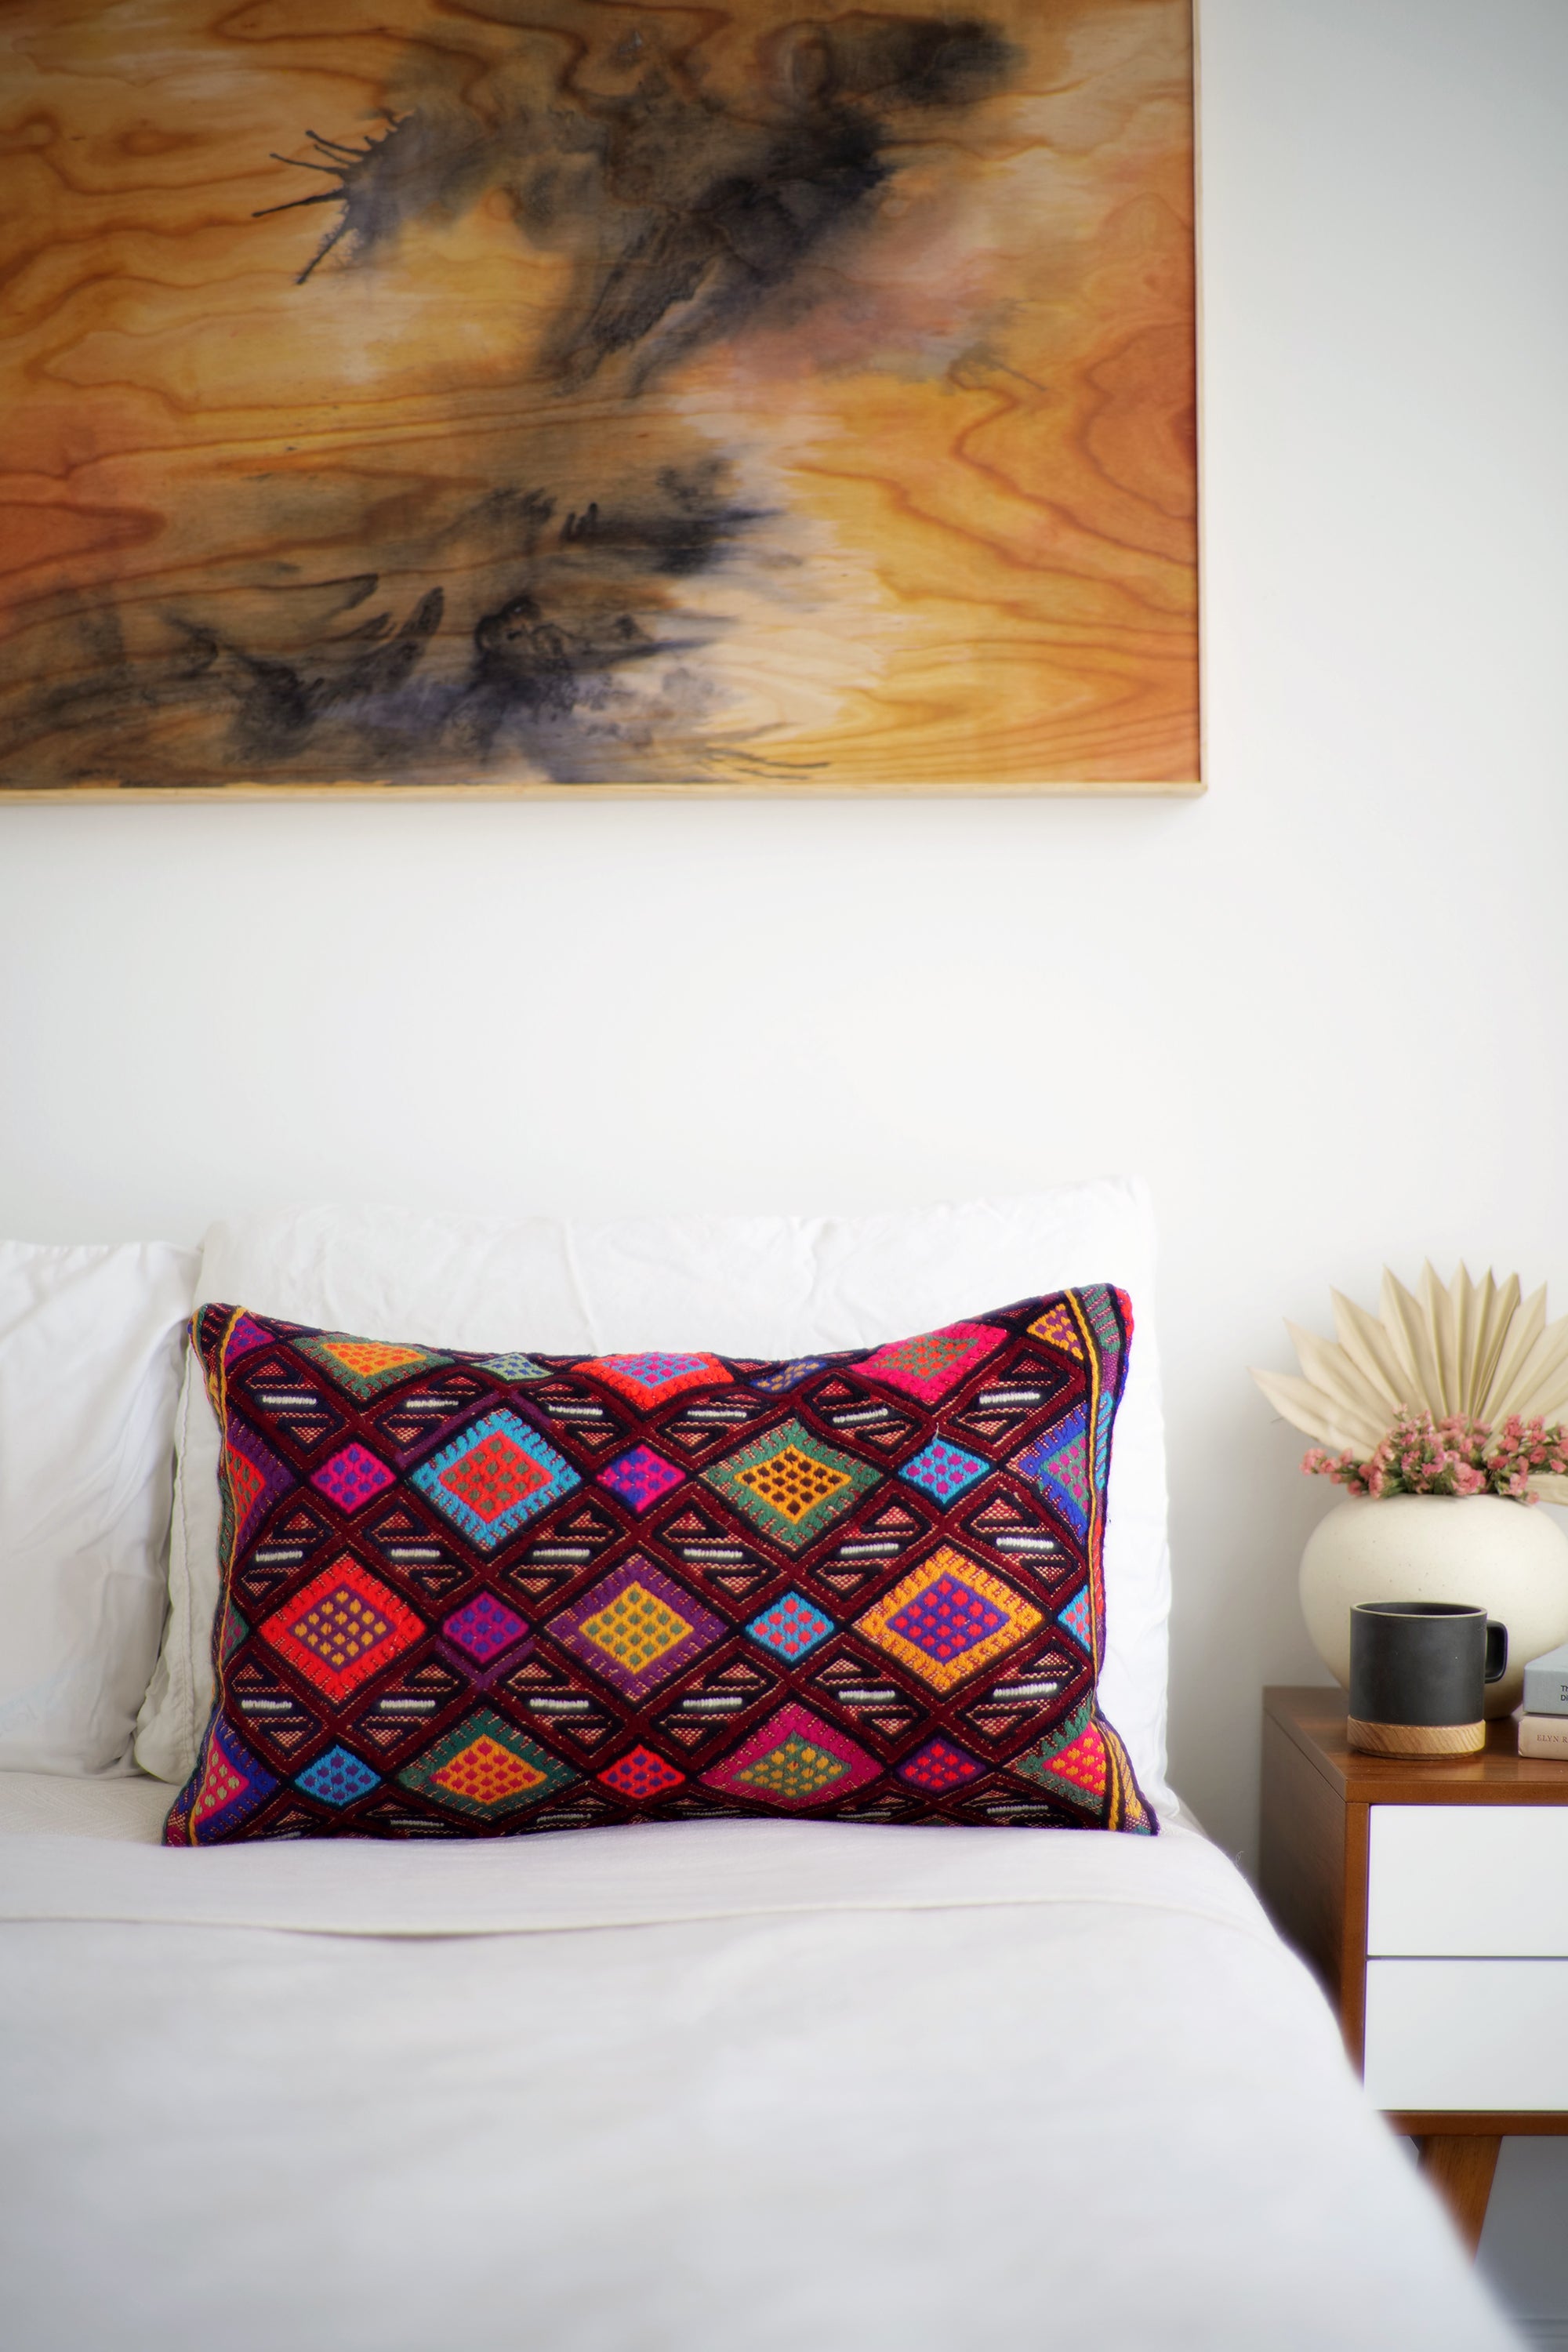 Vintage Kilim Pillow - Curated Vintage Textiles by Canary Lane